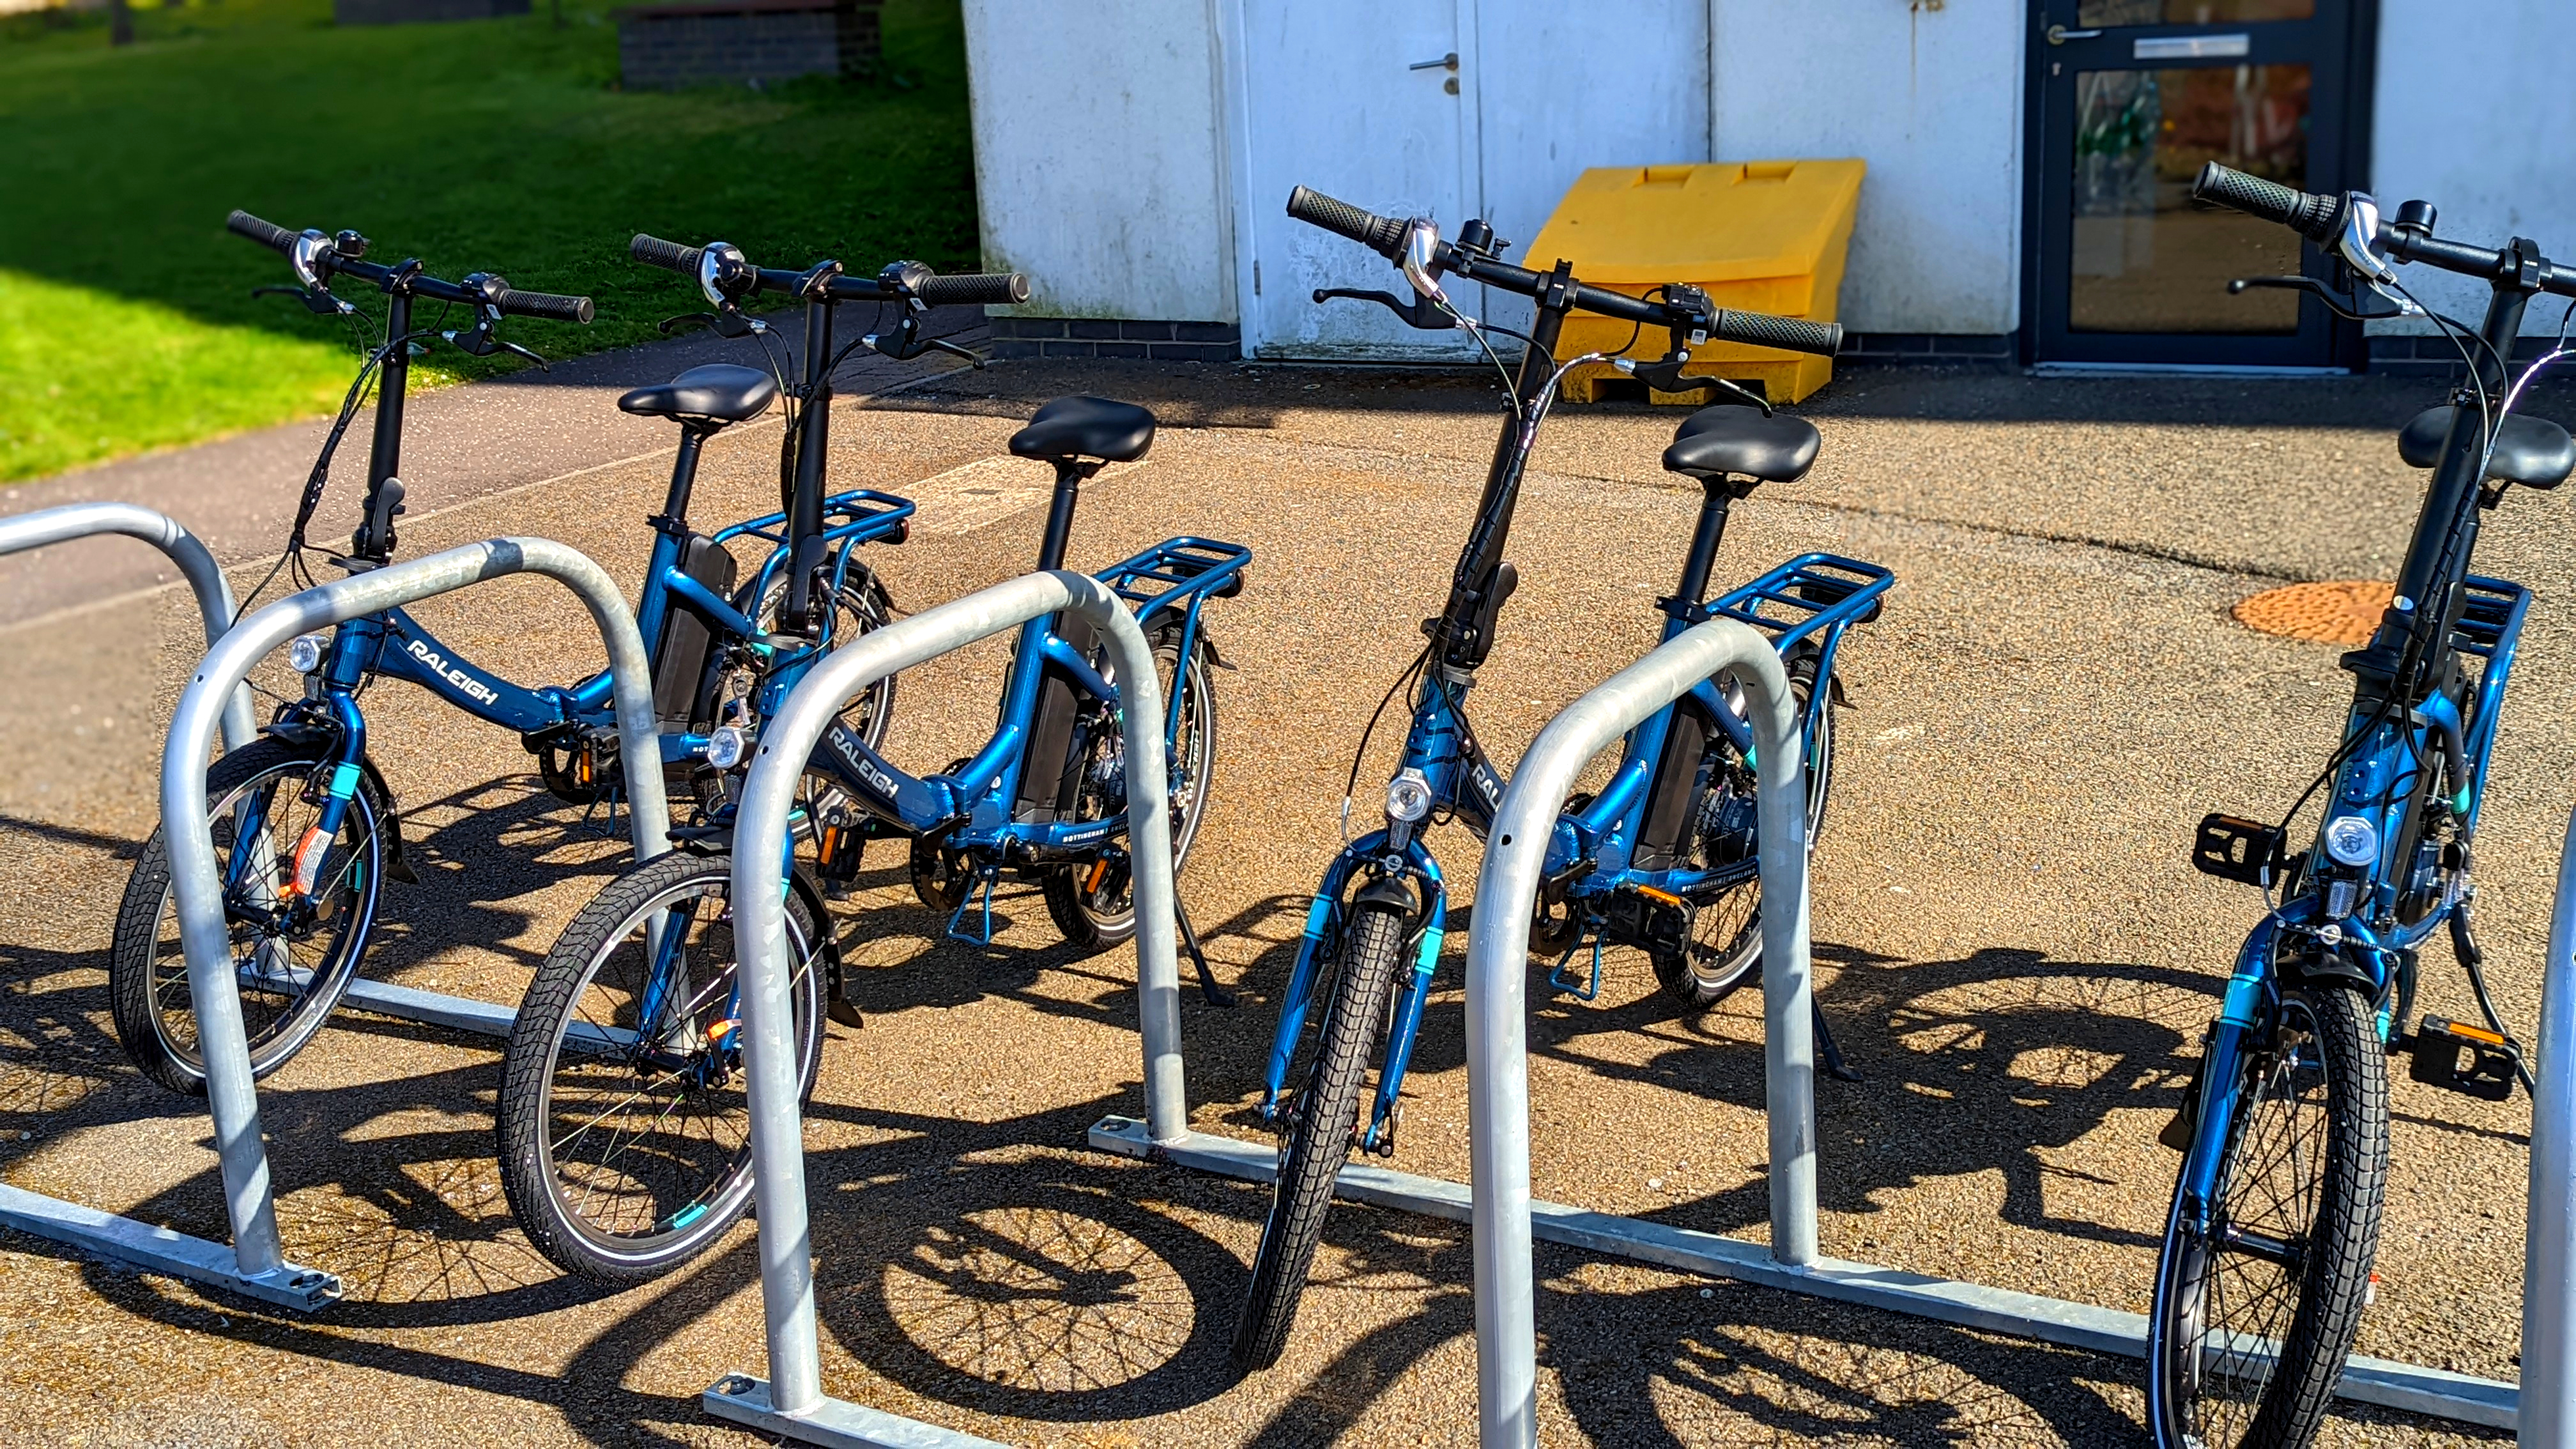 Ore Valley Housing Association launches free community e-bike project